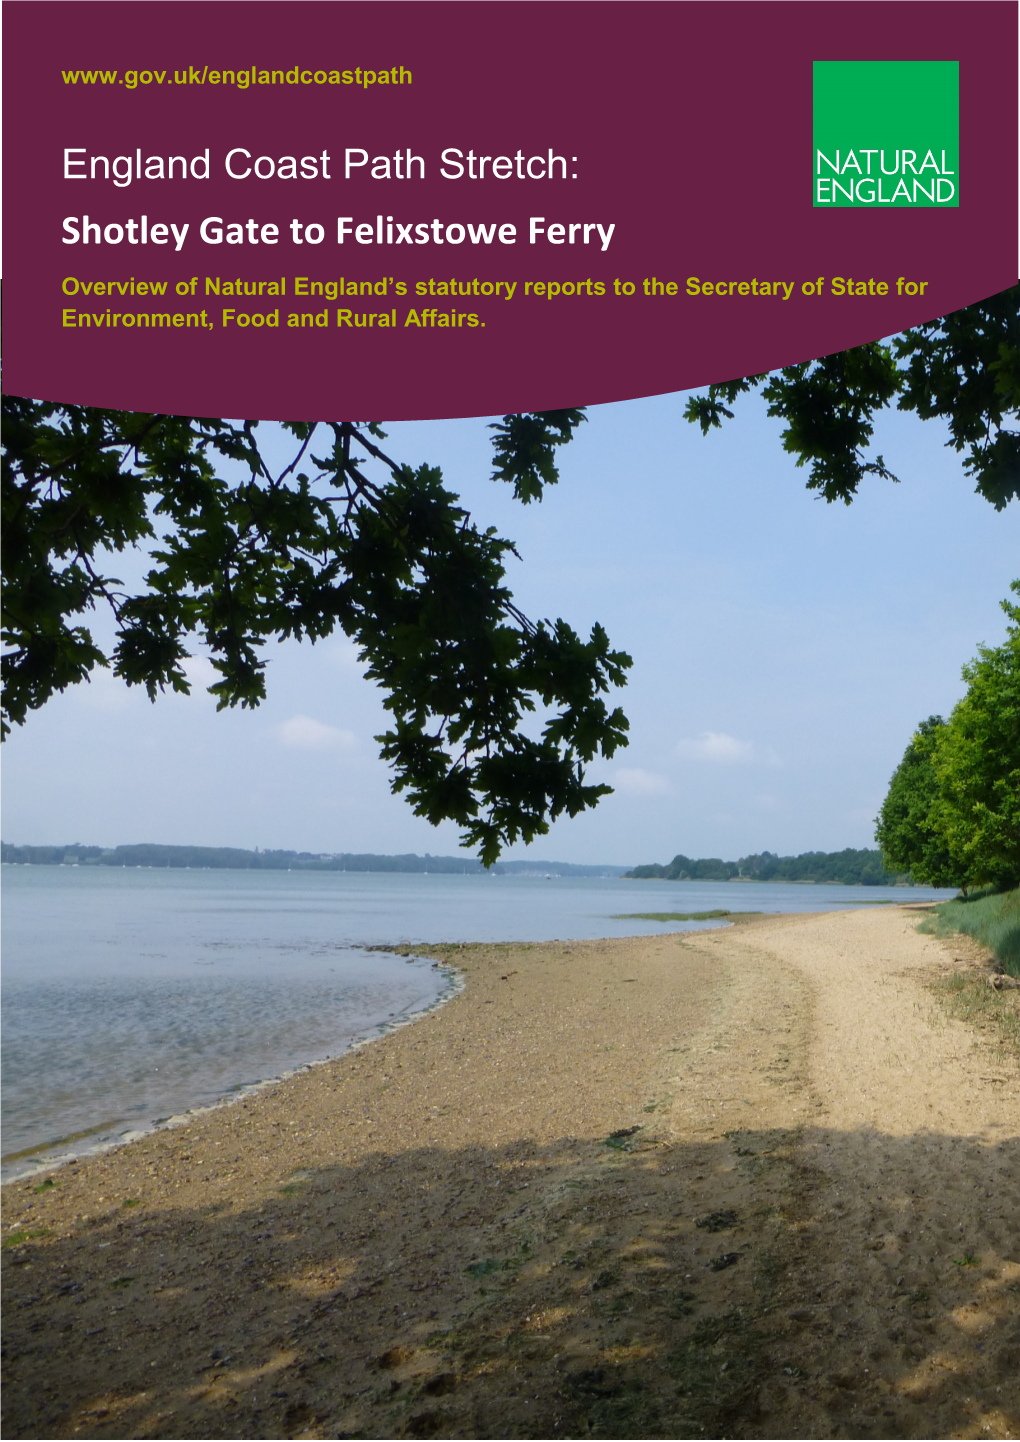 Shotley Gate to Felixstowe Ferry Overview of Natural England’S Statutory Reports to the Secretary of State for Environment, Food and Rural Affairs